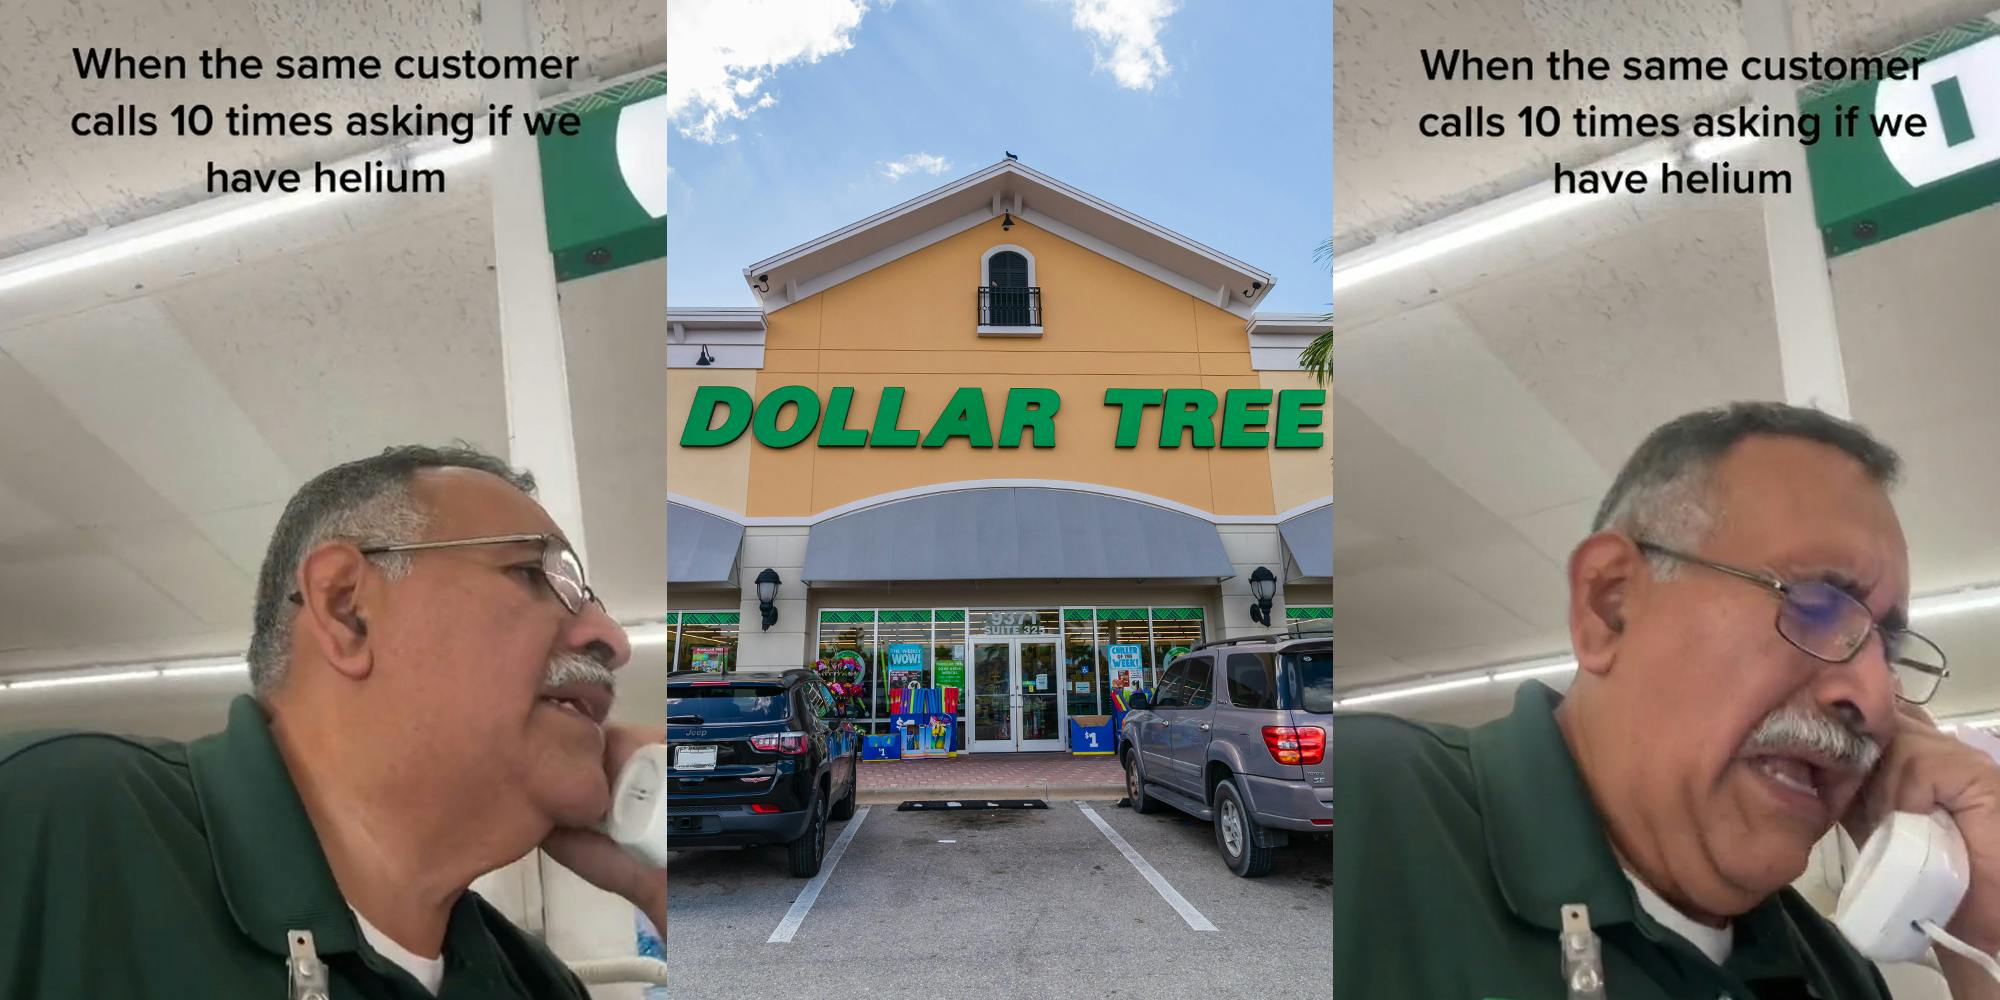 Dollar Tree employee speaking into phone with caption "When the same customer calls 10 times asking if we have helium" (l) Dollar Tree building with sign and blue sky (c) Dollar Tree employee speaking into phone with caption "When the same customer calls 10 times asking if we have helium" (r)